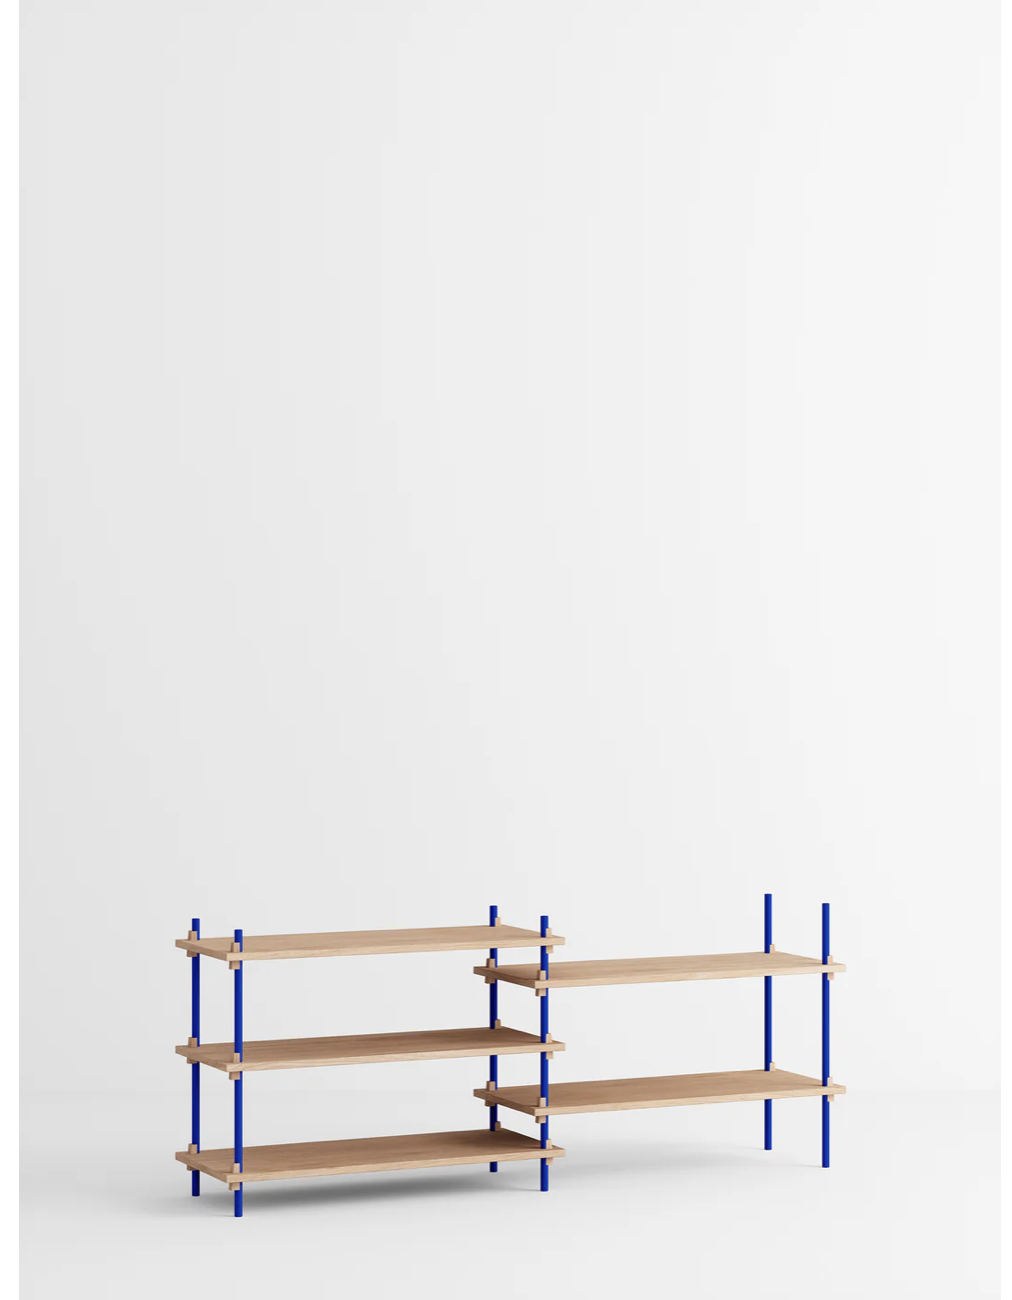 Shelving System – s.65.2.A